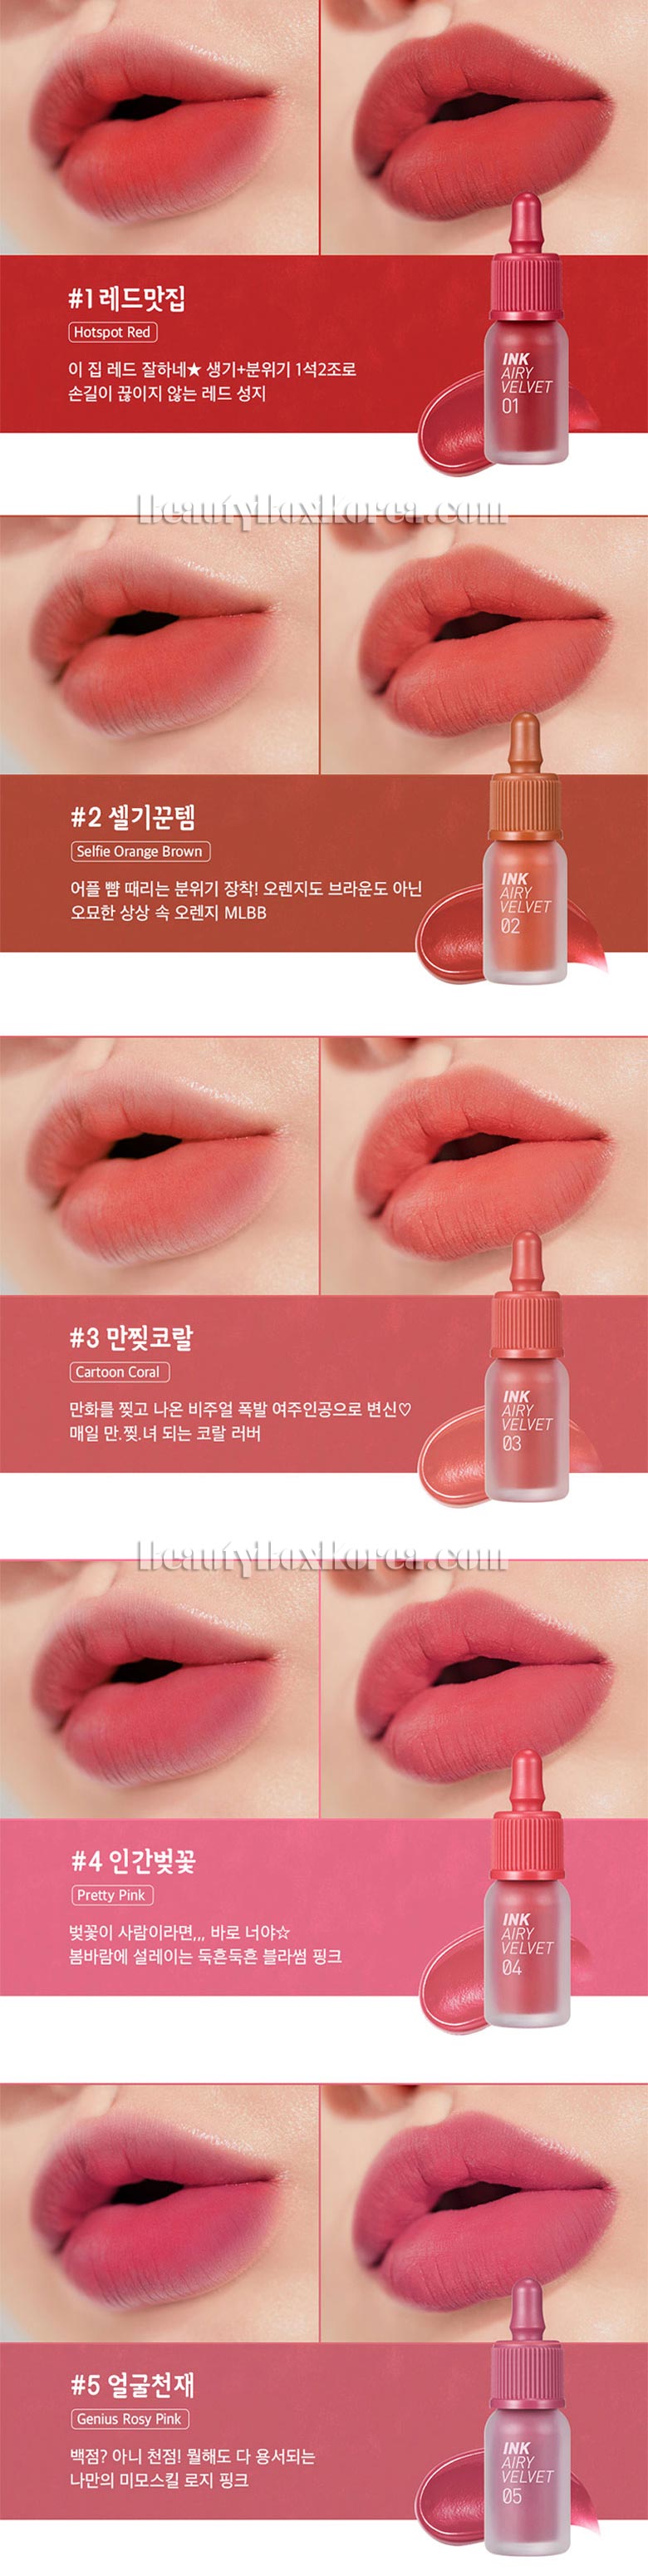 Peripera Ink The Airy Velvet Ad 4g Best Price And Fast Shipping From Beauty Box Korea